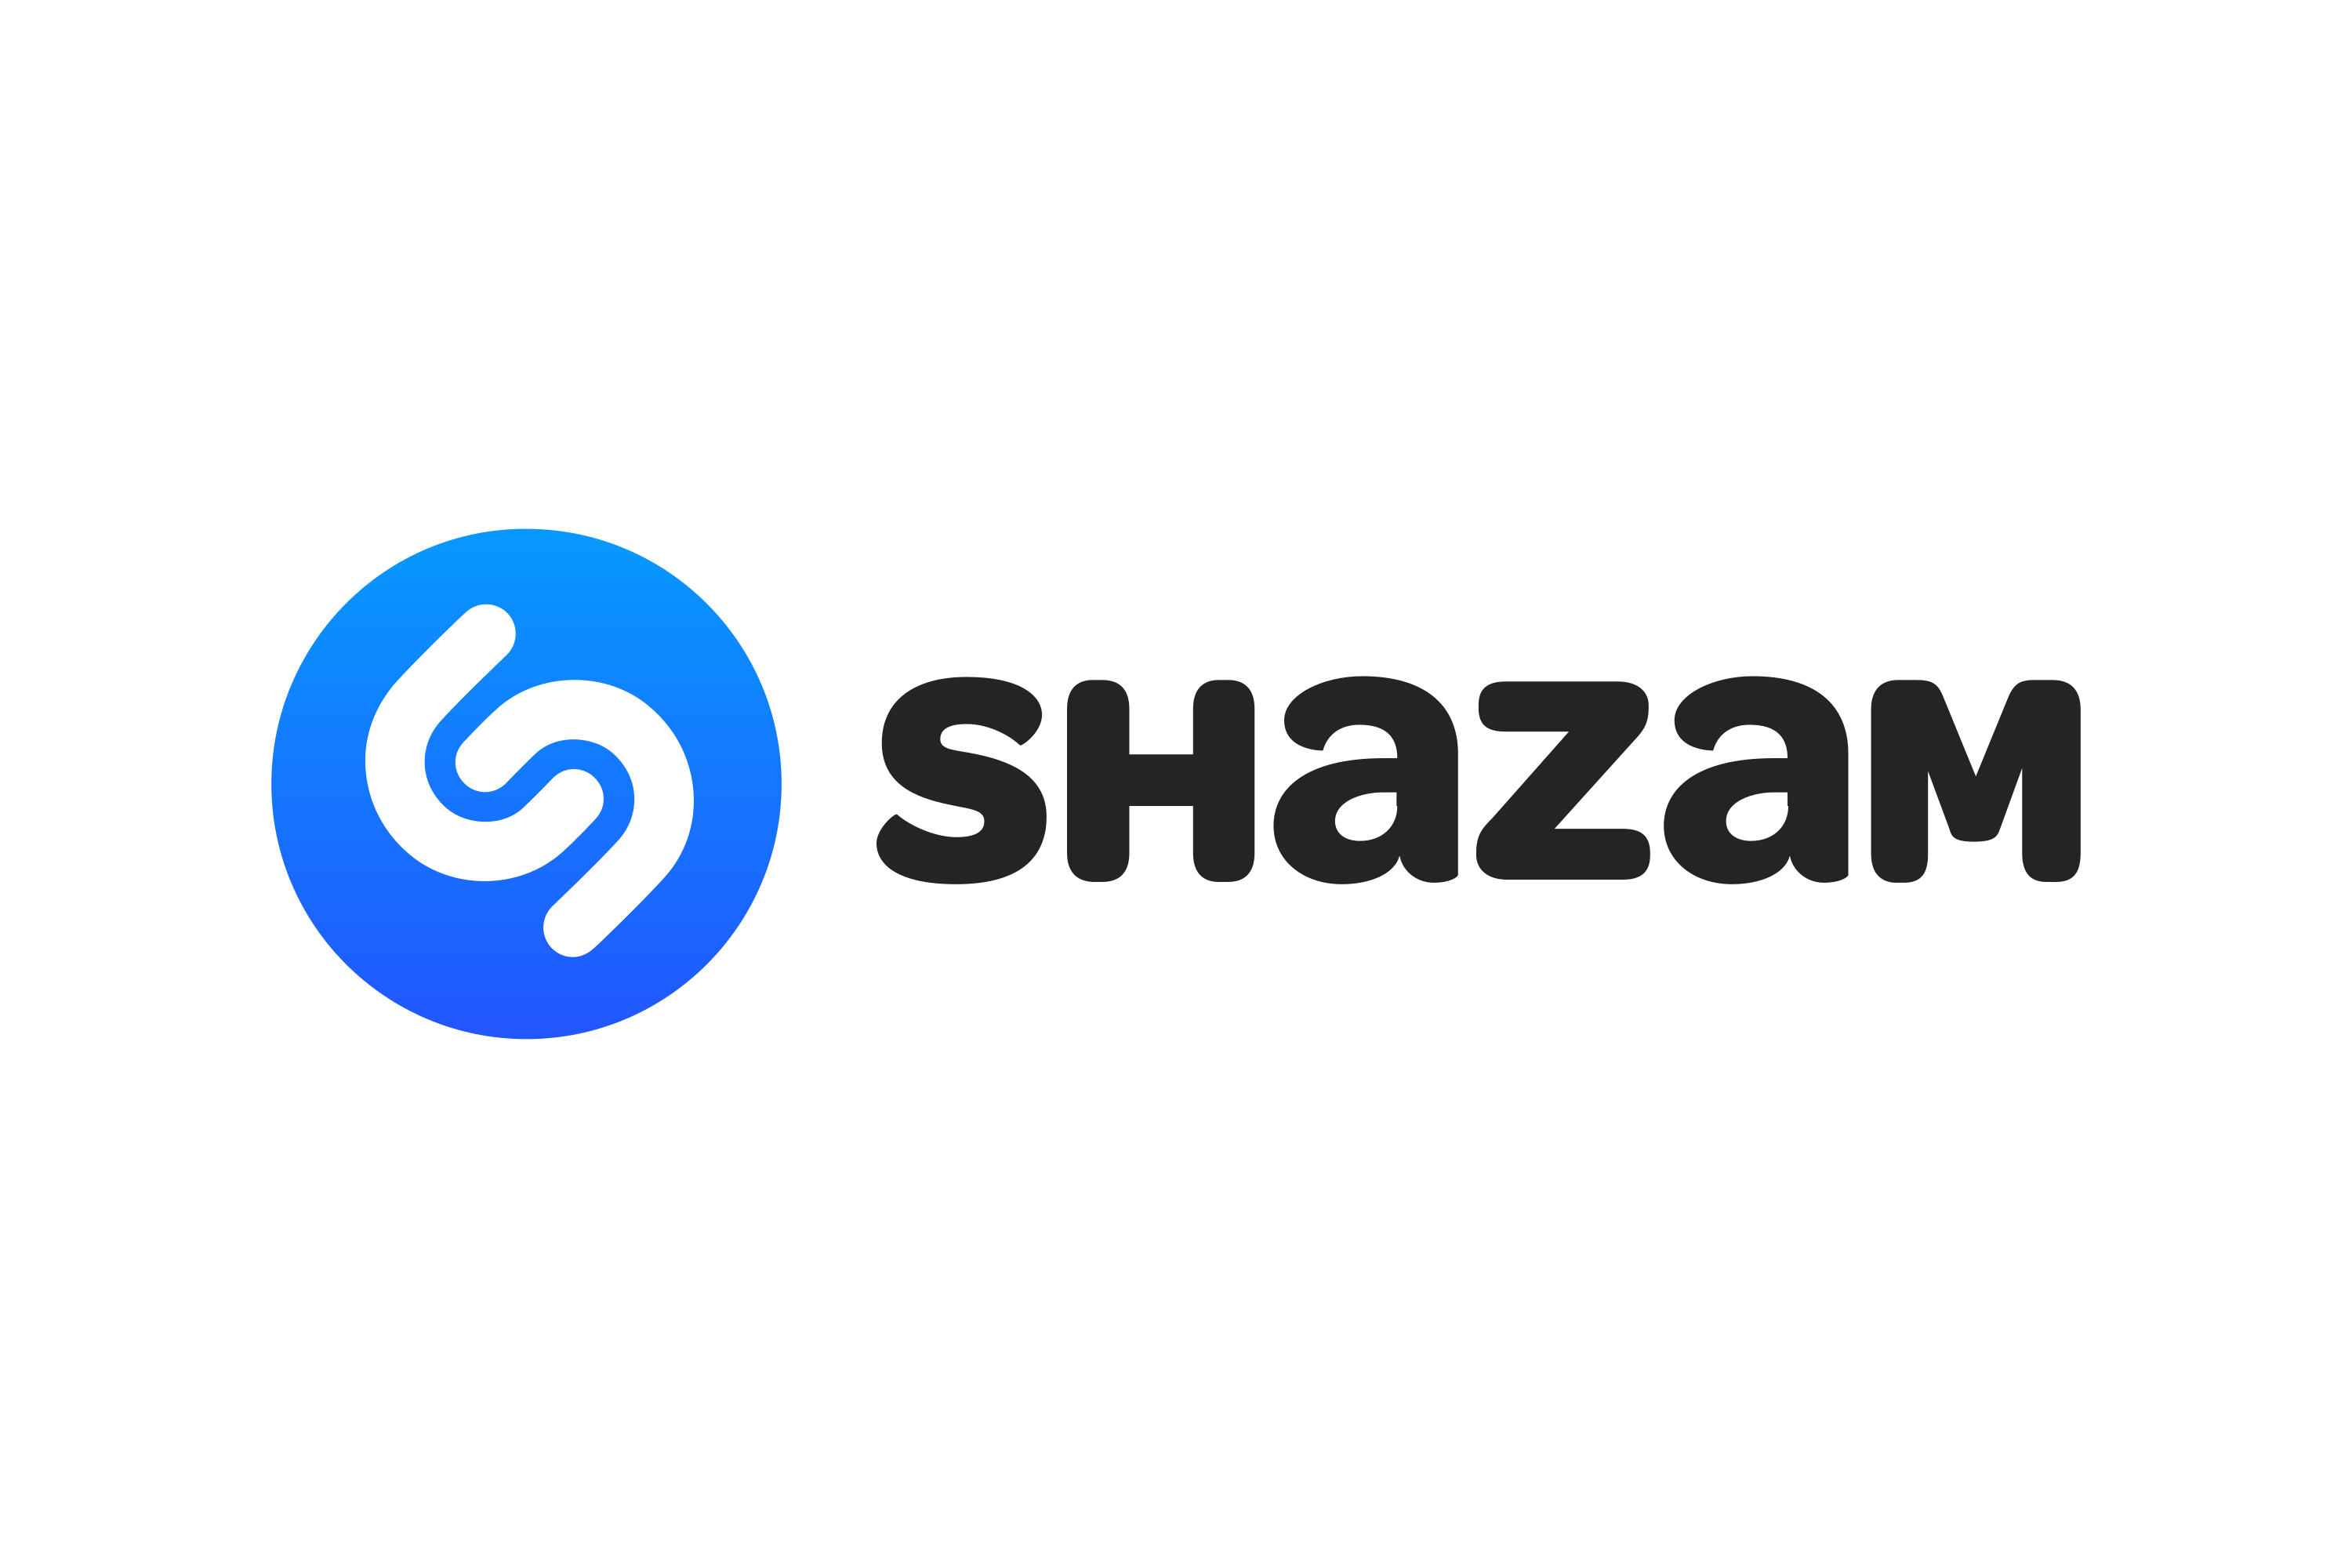 Shazam not working? These steps might help